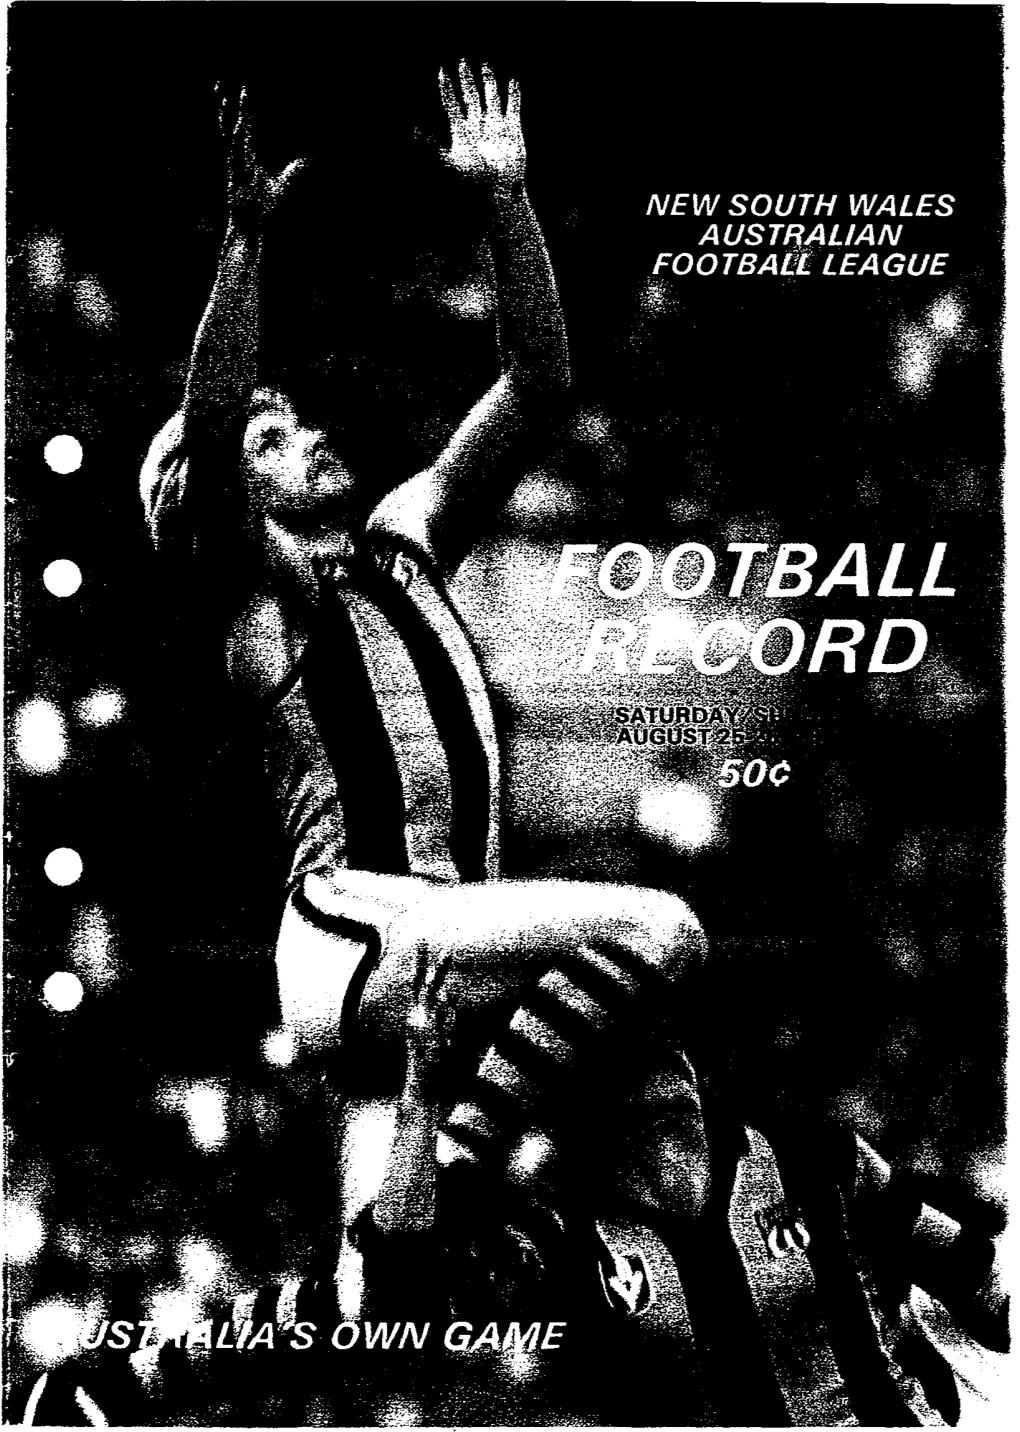 Football Record Volume51 Number21 Official Organ of the N.S